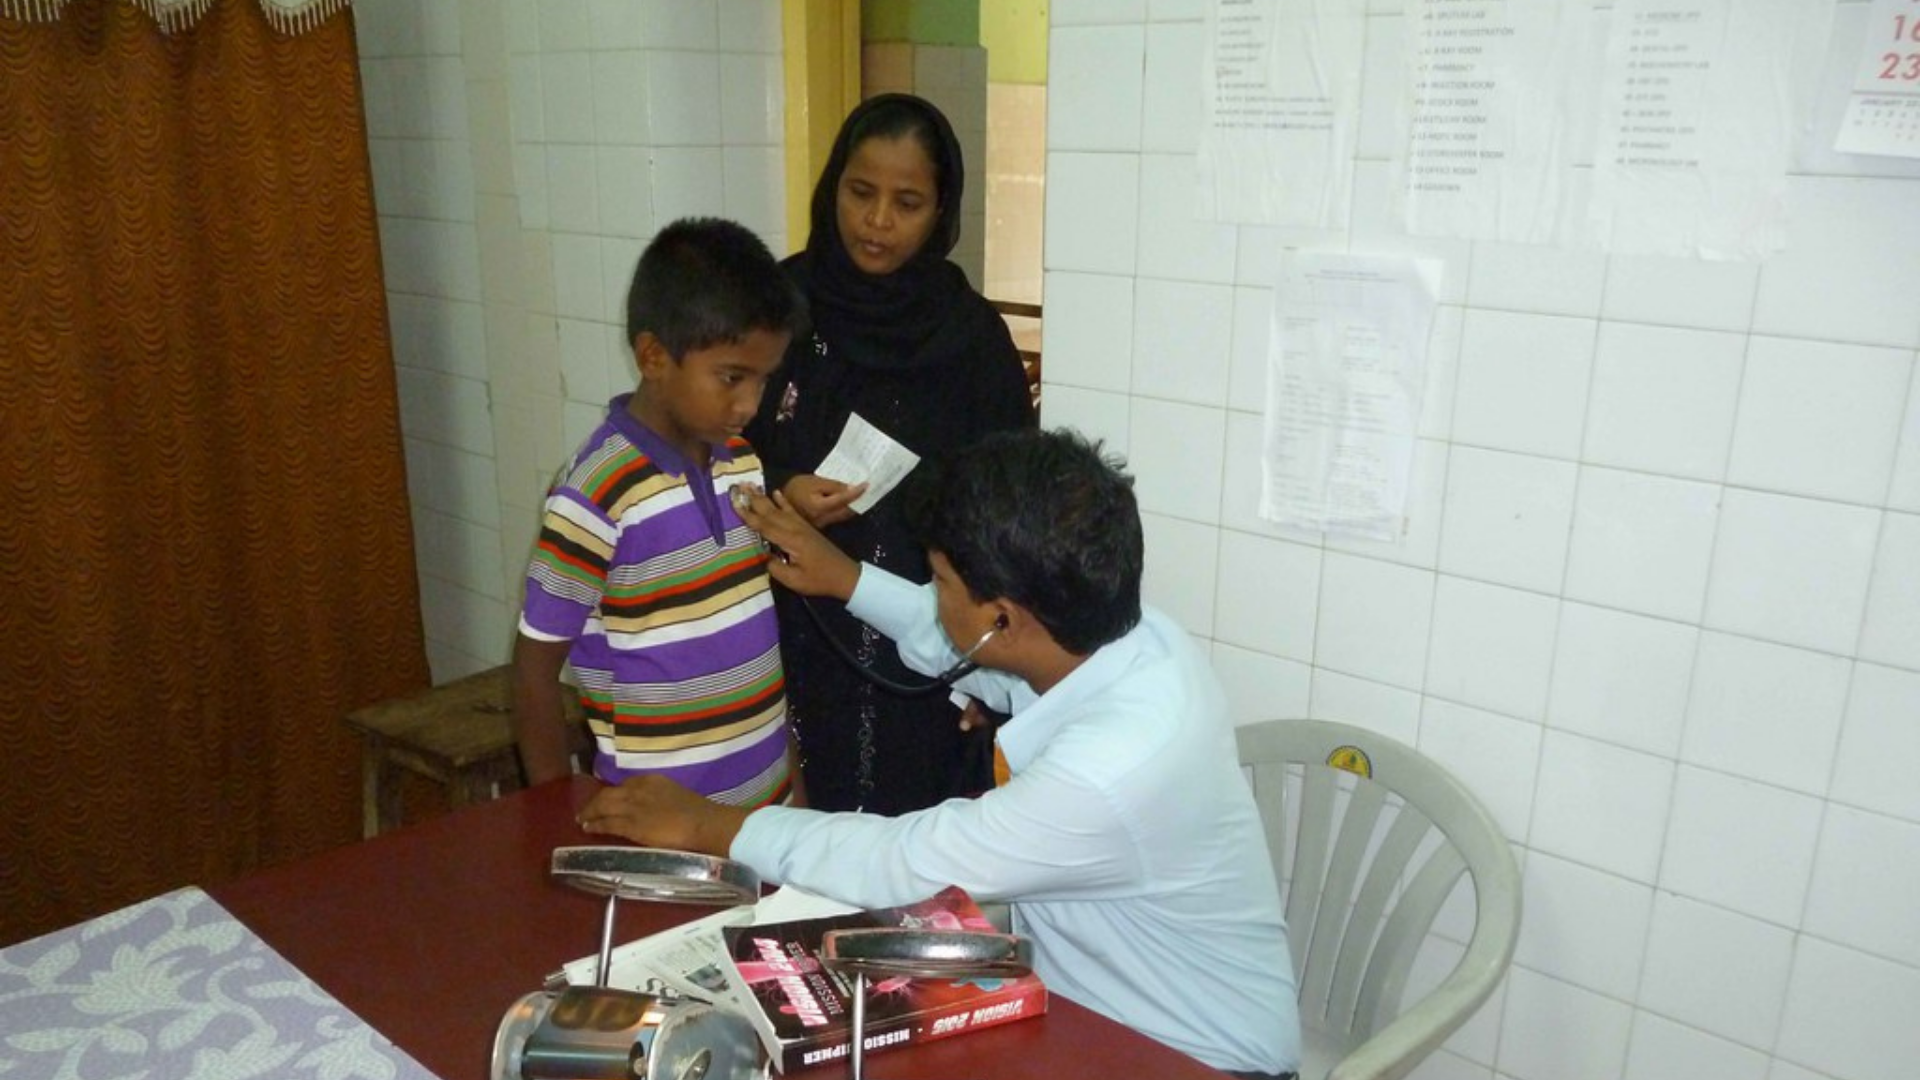 Doctor screens child for tuberculosis in India. Photo courtesy of CDC Global Health.